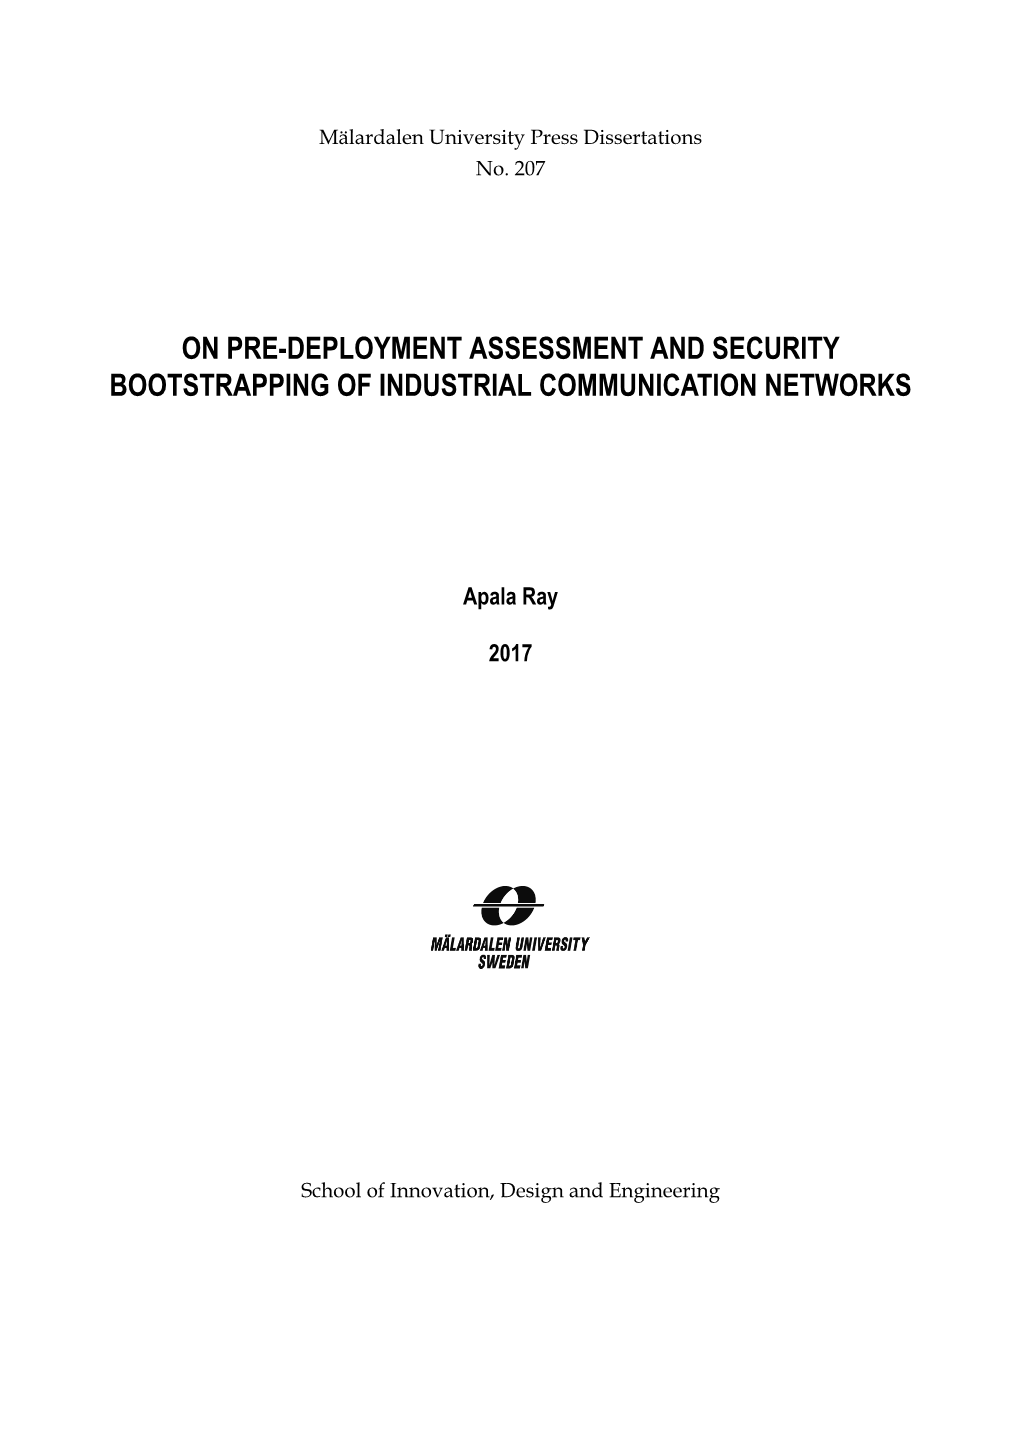 On Pre-Deployment Assessment and Security Bootstrapping of Industrial Communication Networks